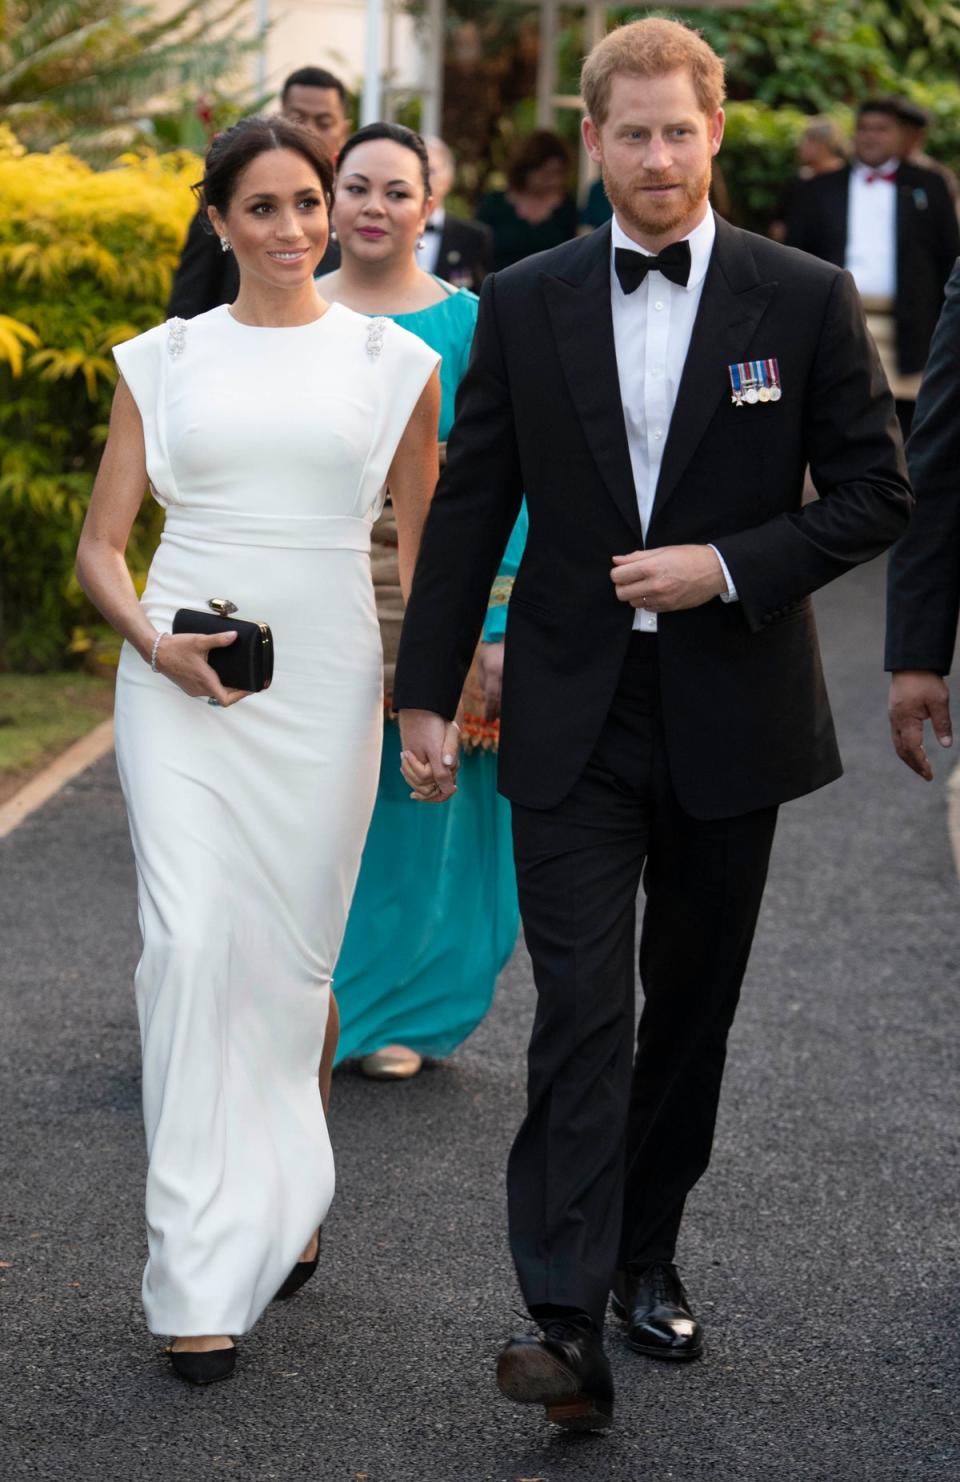 Meghan chose a white sleeveless gown. (Getty Images)